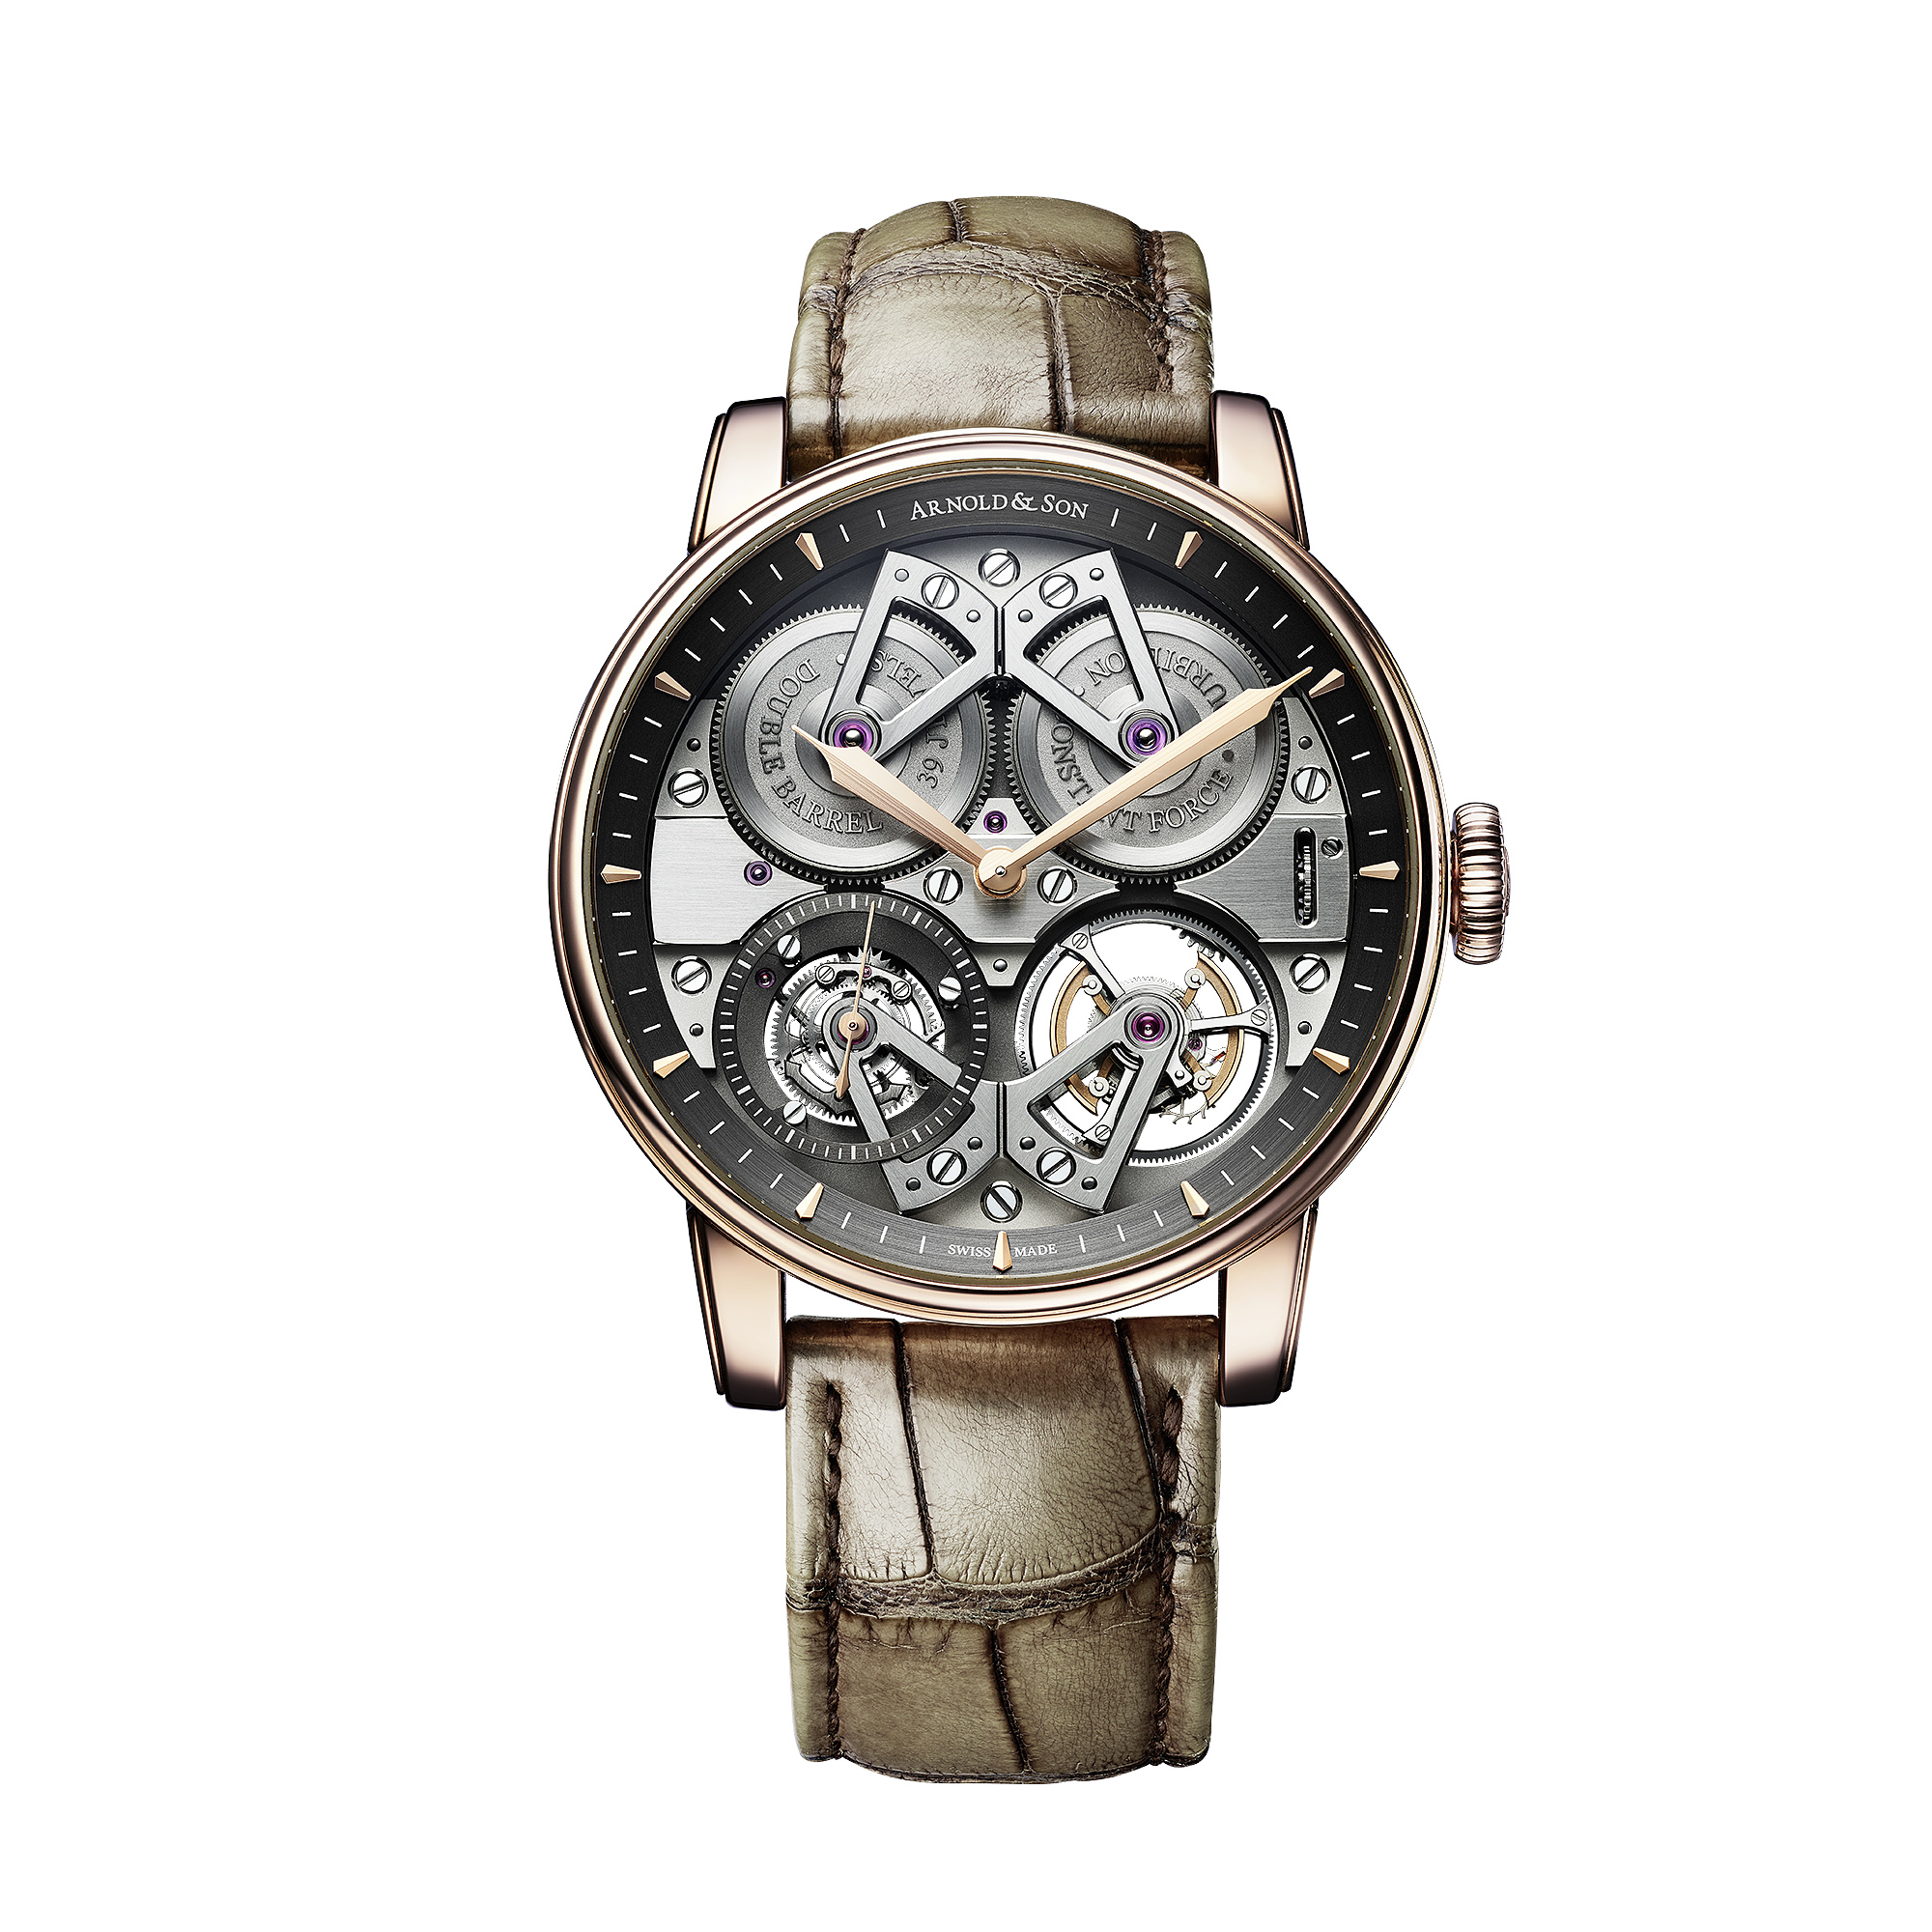 CONSTANT FORCE TOURBILLON <br> TRIFOLD APPROACH TO CHRONOMETRY